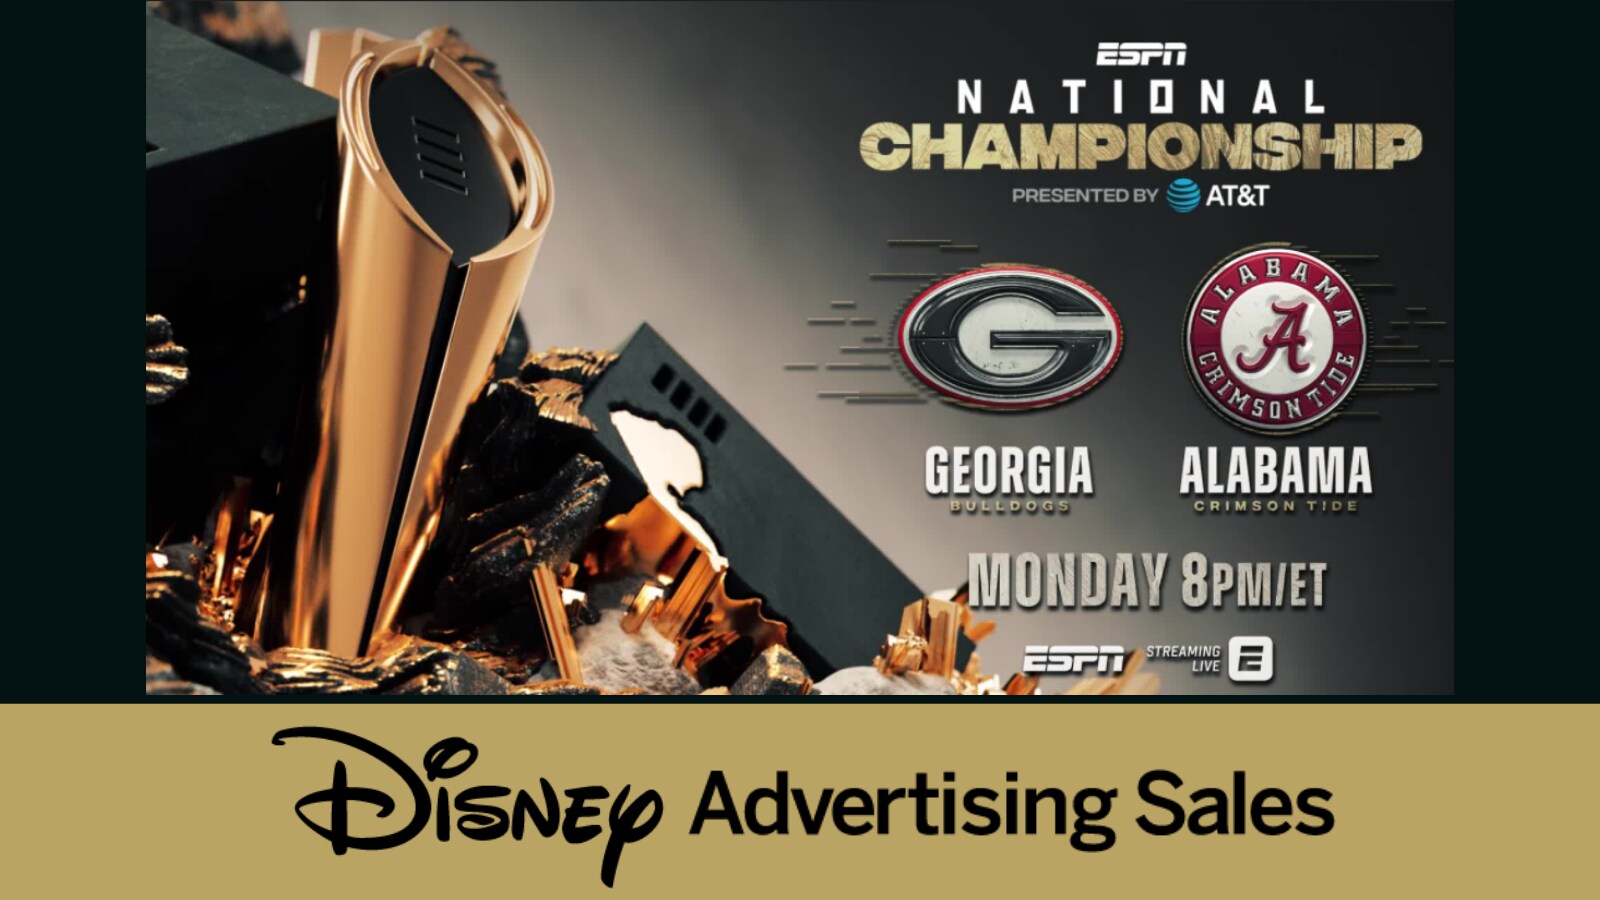 Disney Advertising Sales Kicks Off the New Year with Exciting Sponsorship Portfolio for College Football Playoff National Championship Game 